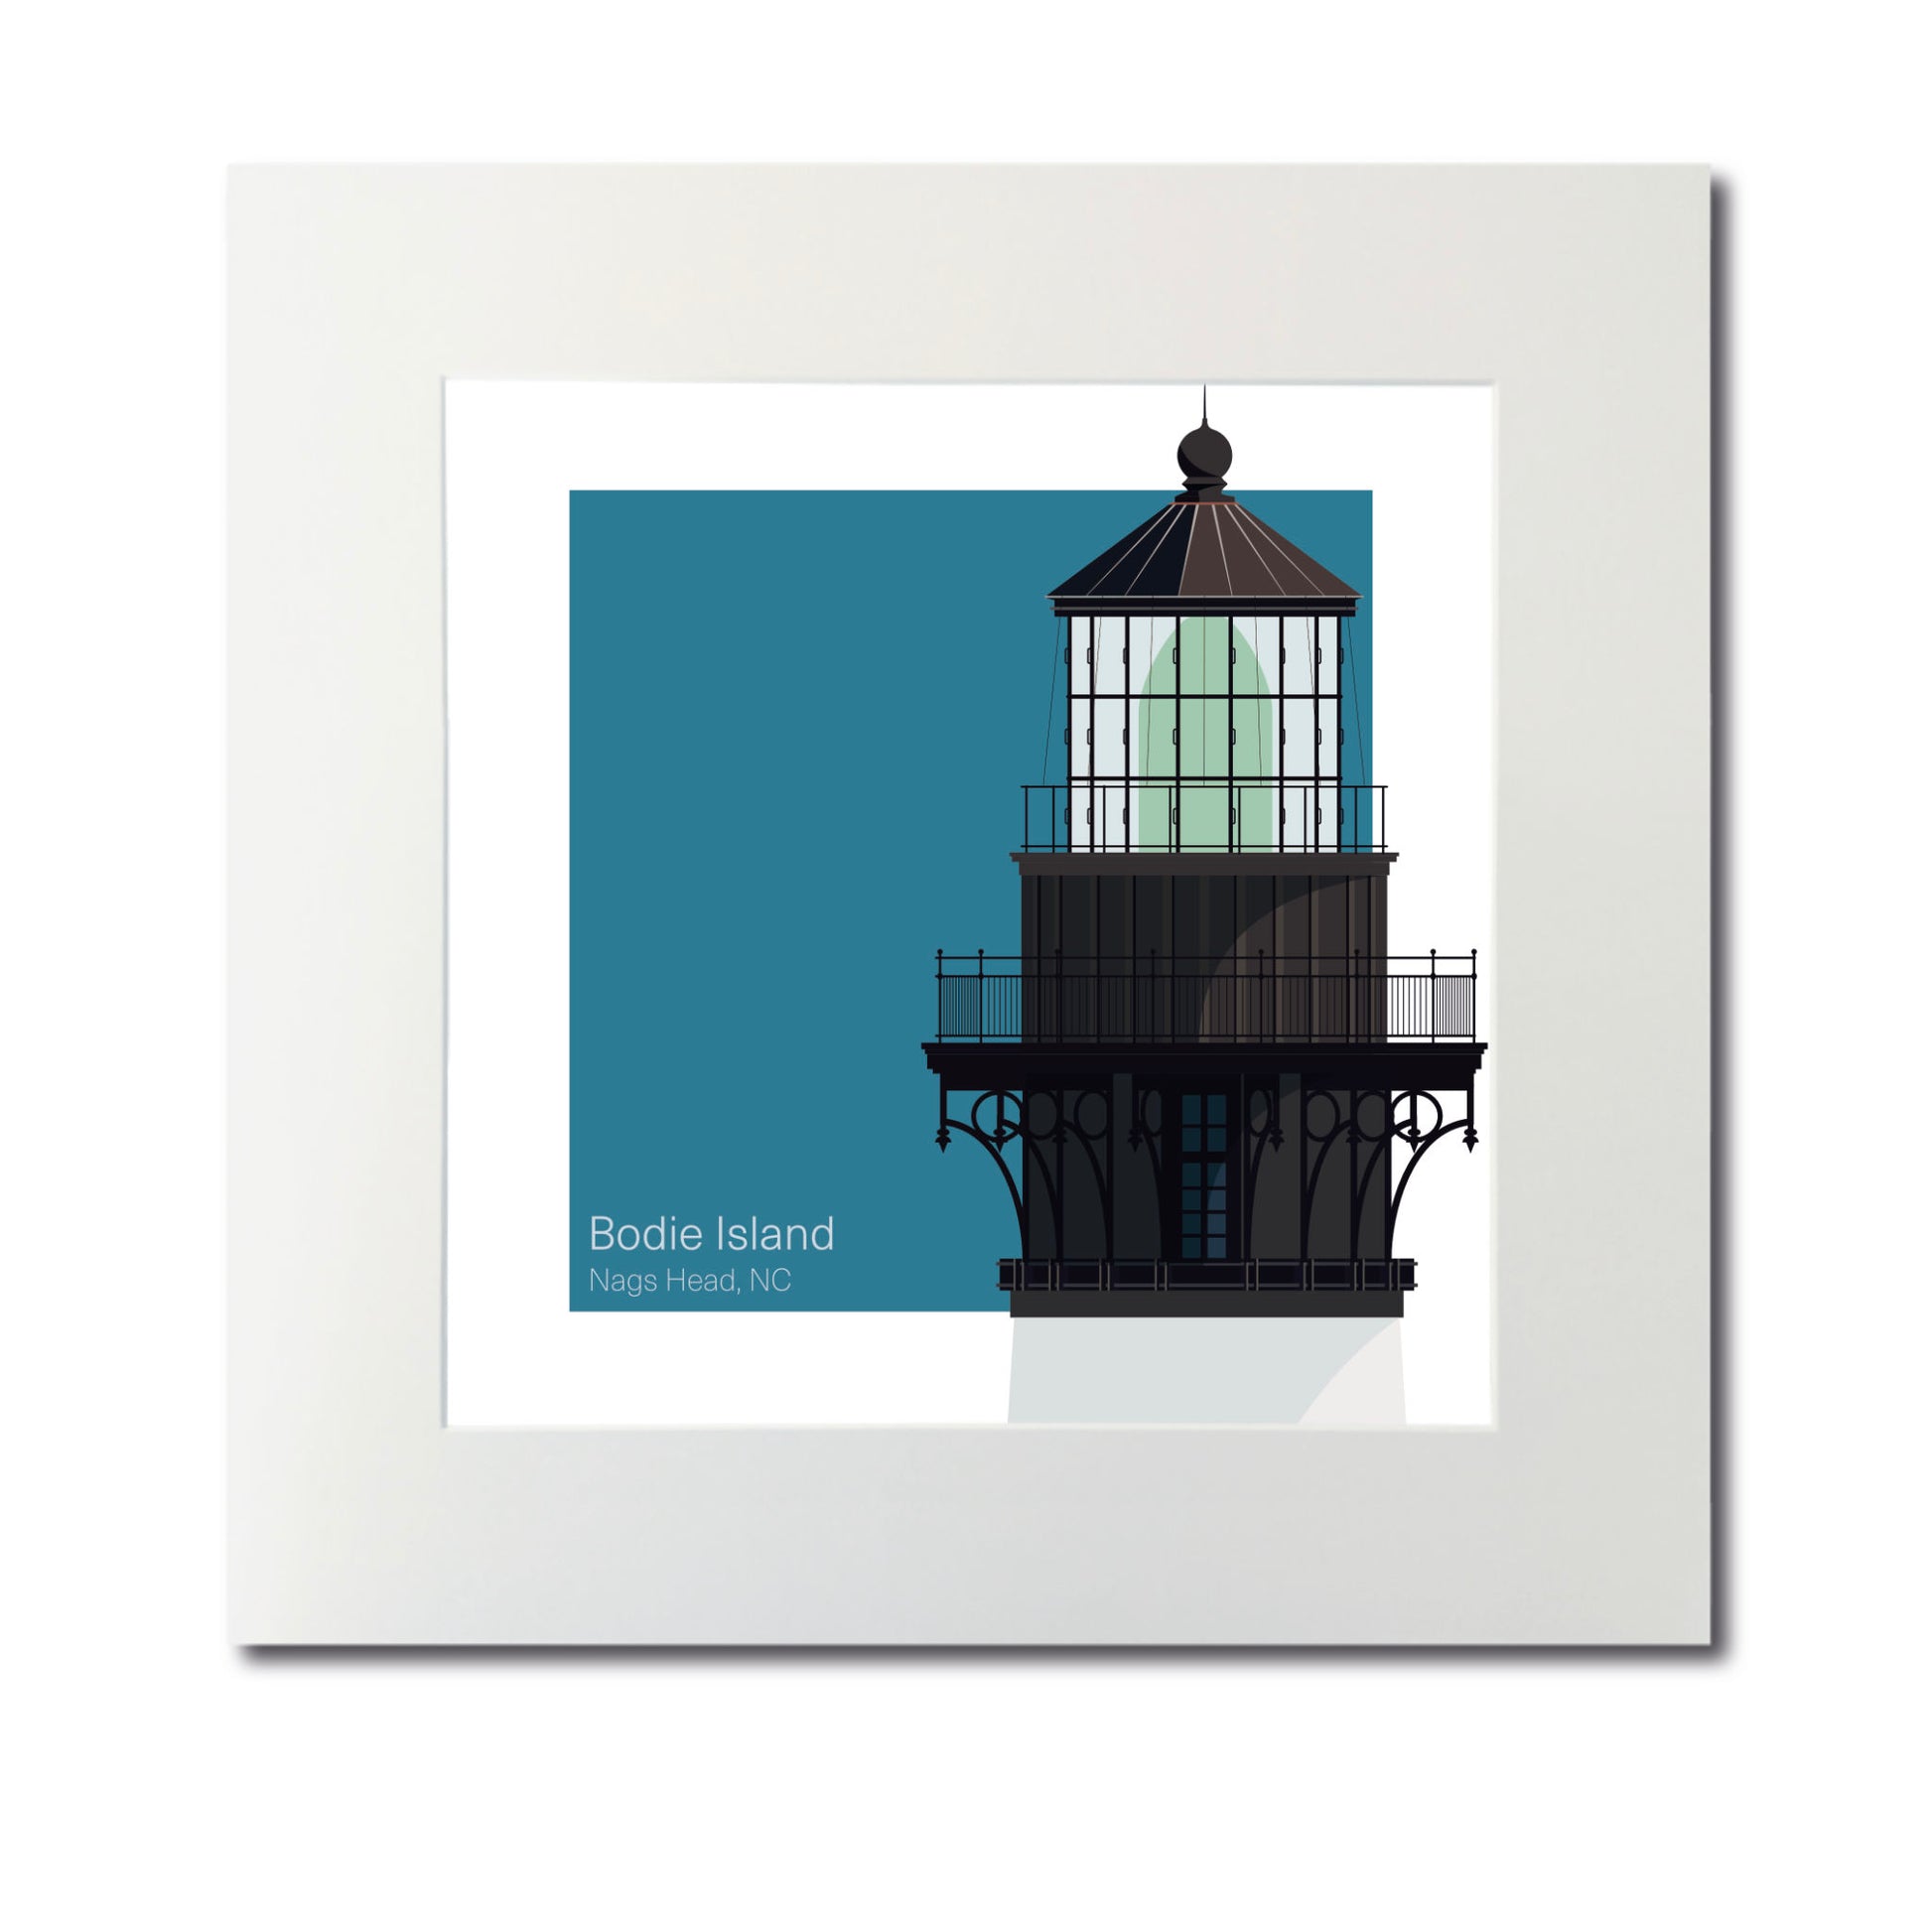 Illustration of the Bodie Island lighthouse, NC, USA. On a white background with aqua blue square as a backdrop., mounted and measuring 12"x12" (30x30cm).